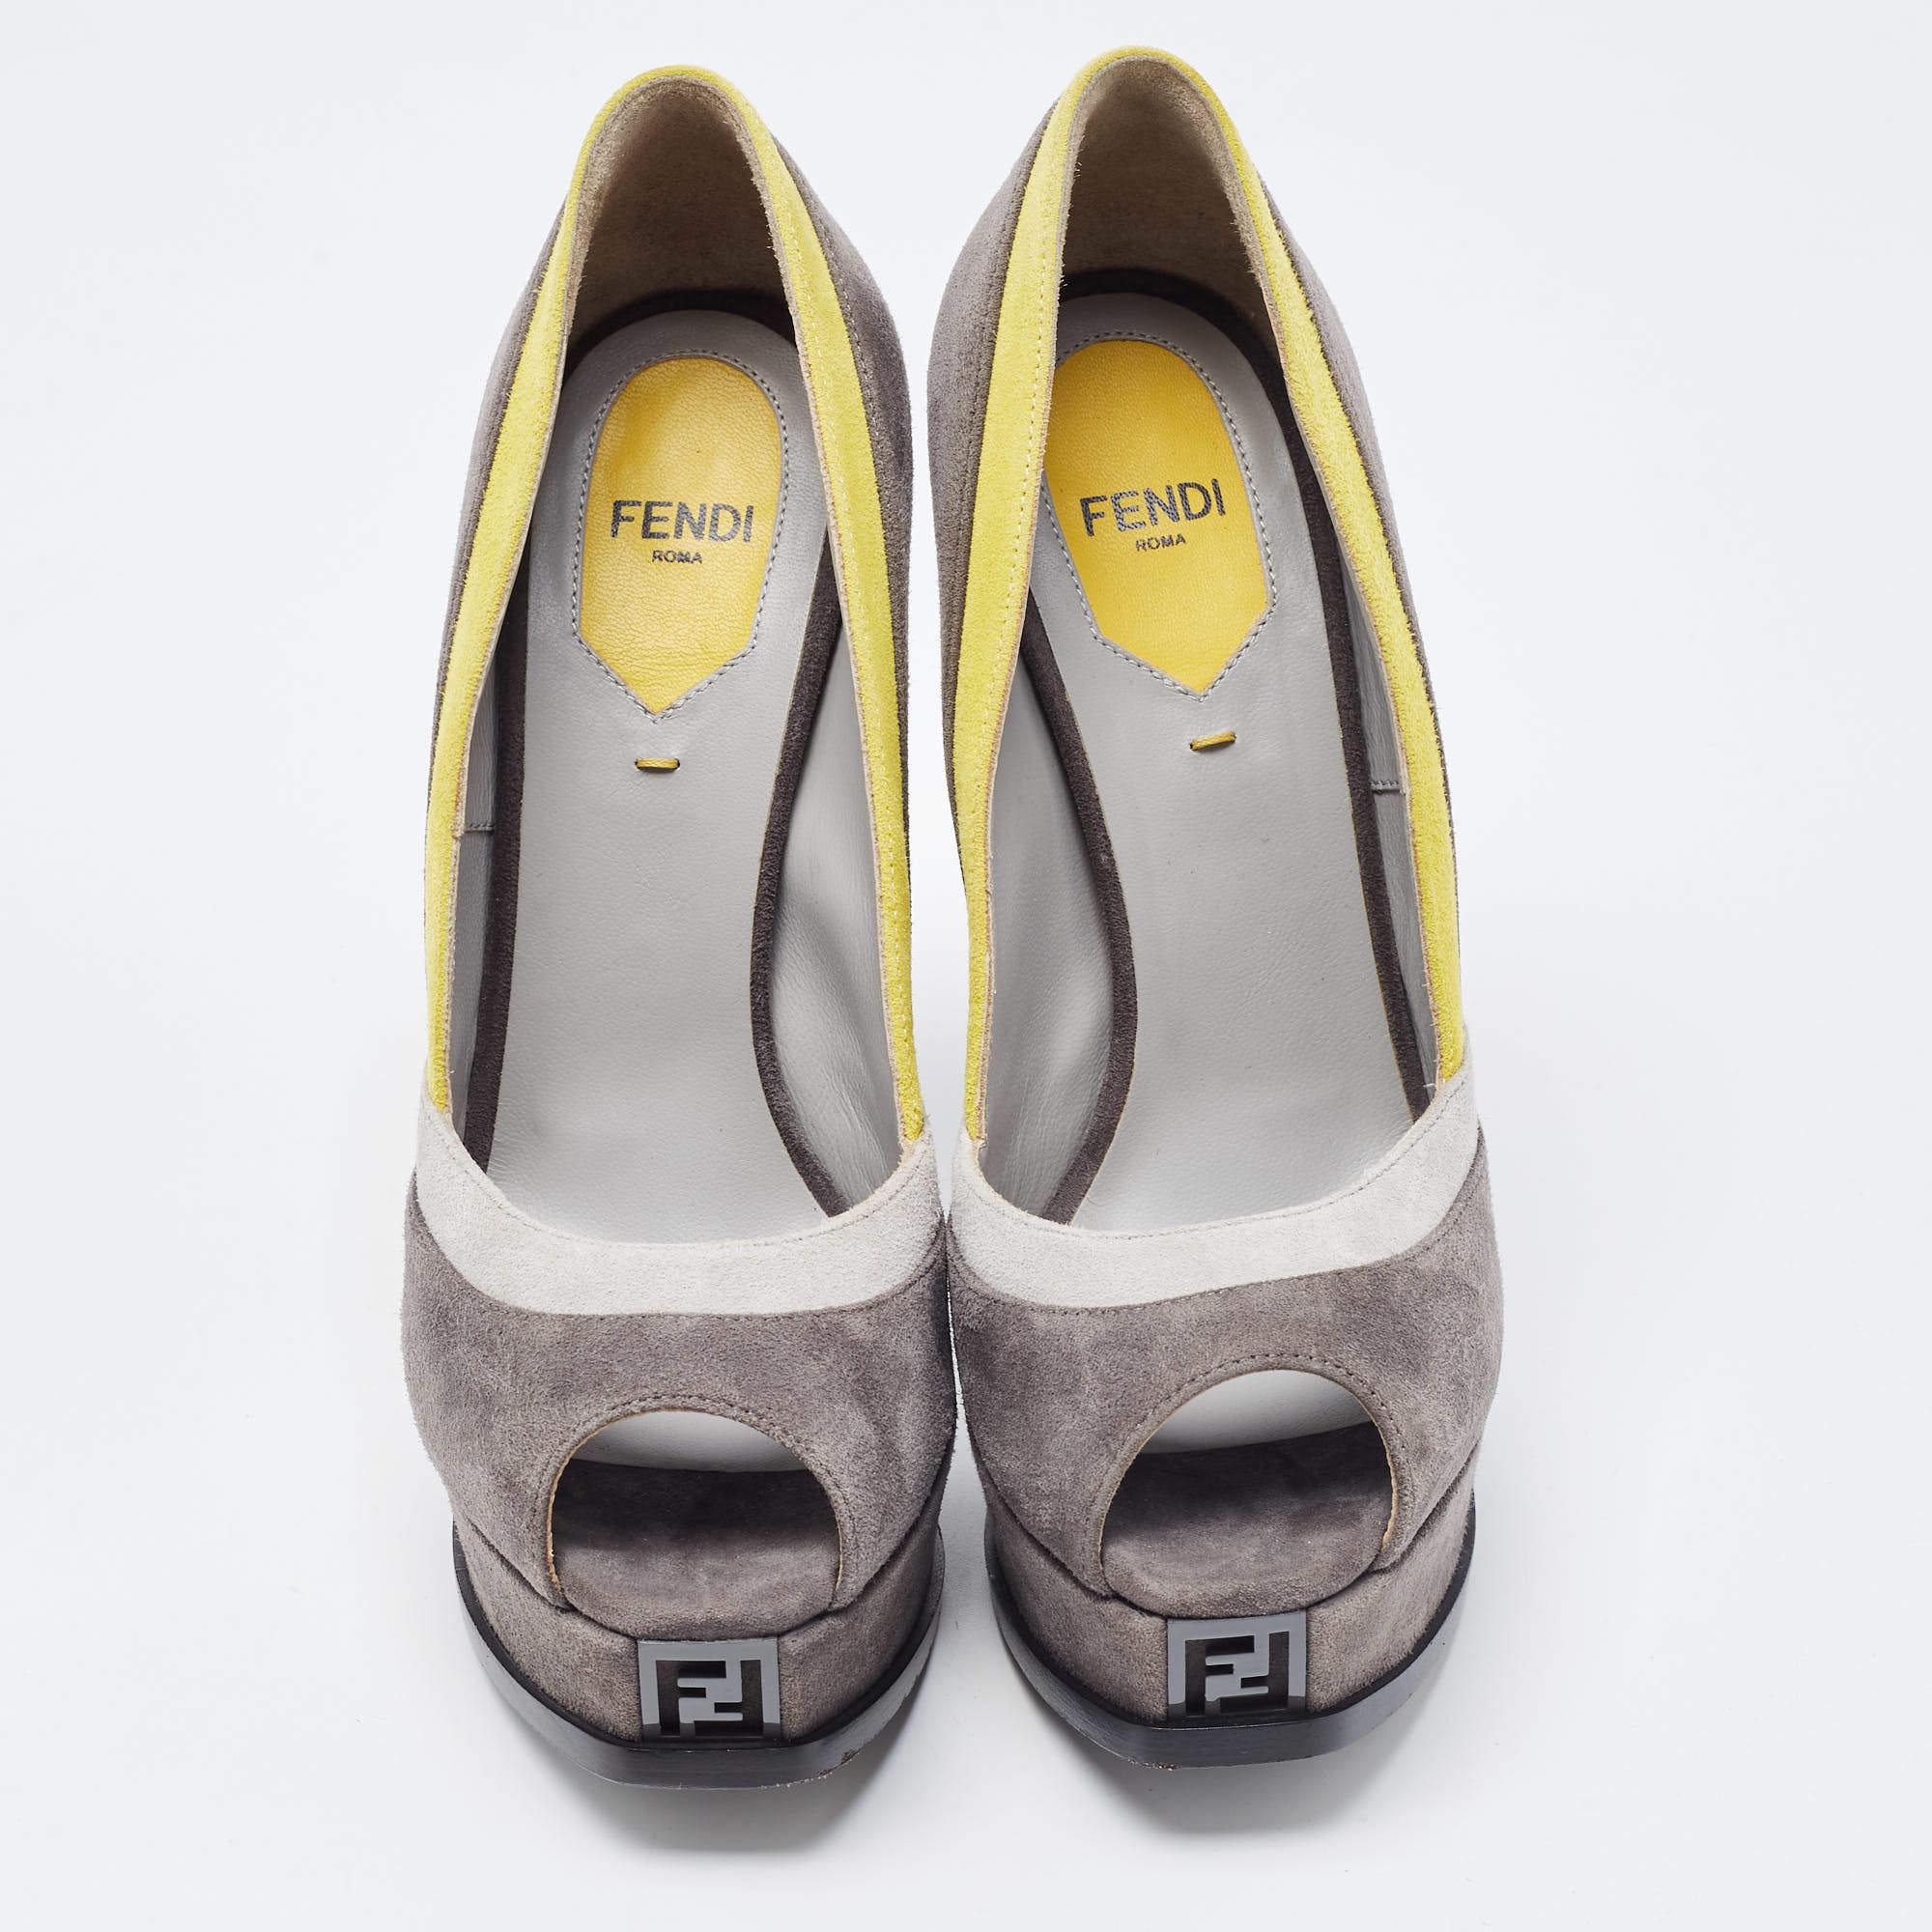 Make a chic style statement with these designer pumps. They showcase sturdy heels and durable soles, perfect for your fashionable outings!

Includes
Original Dustbag